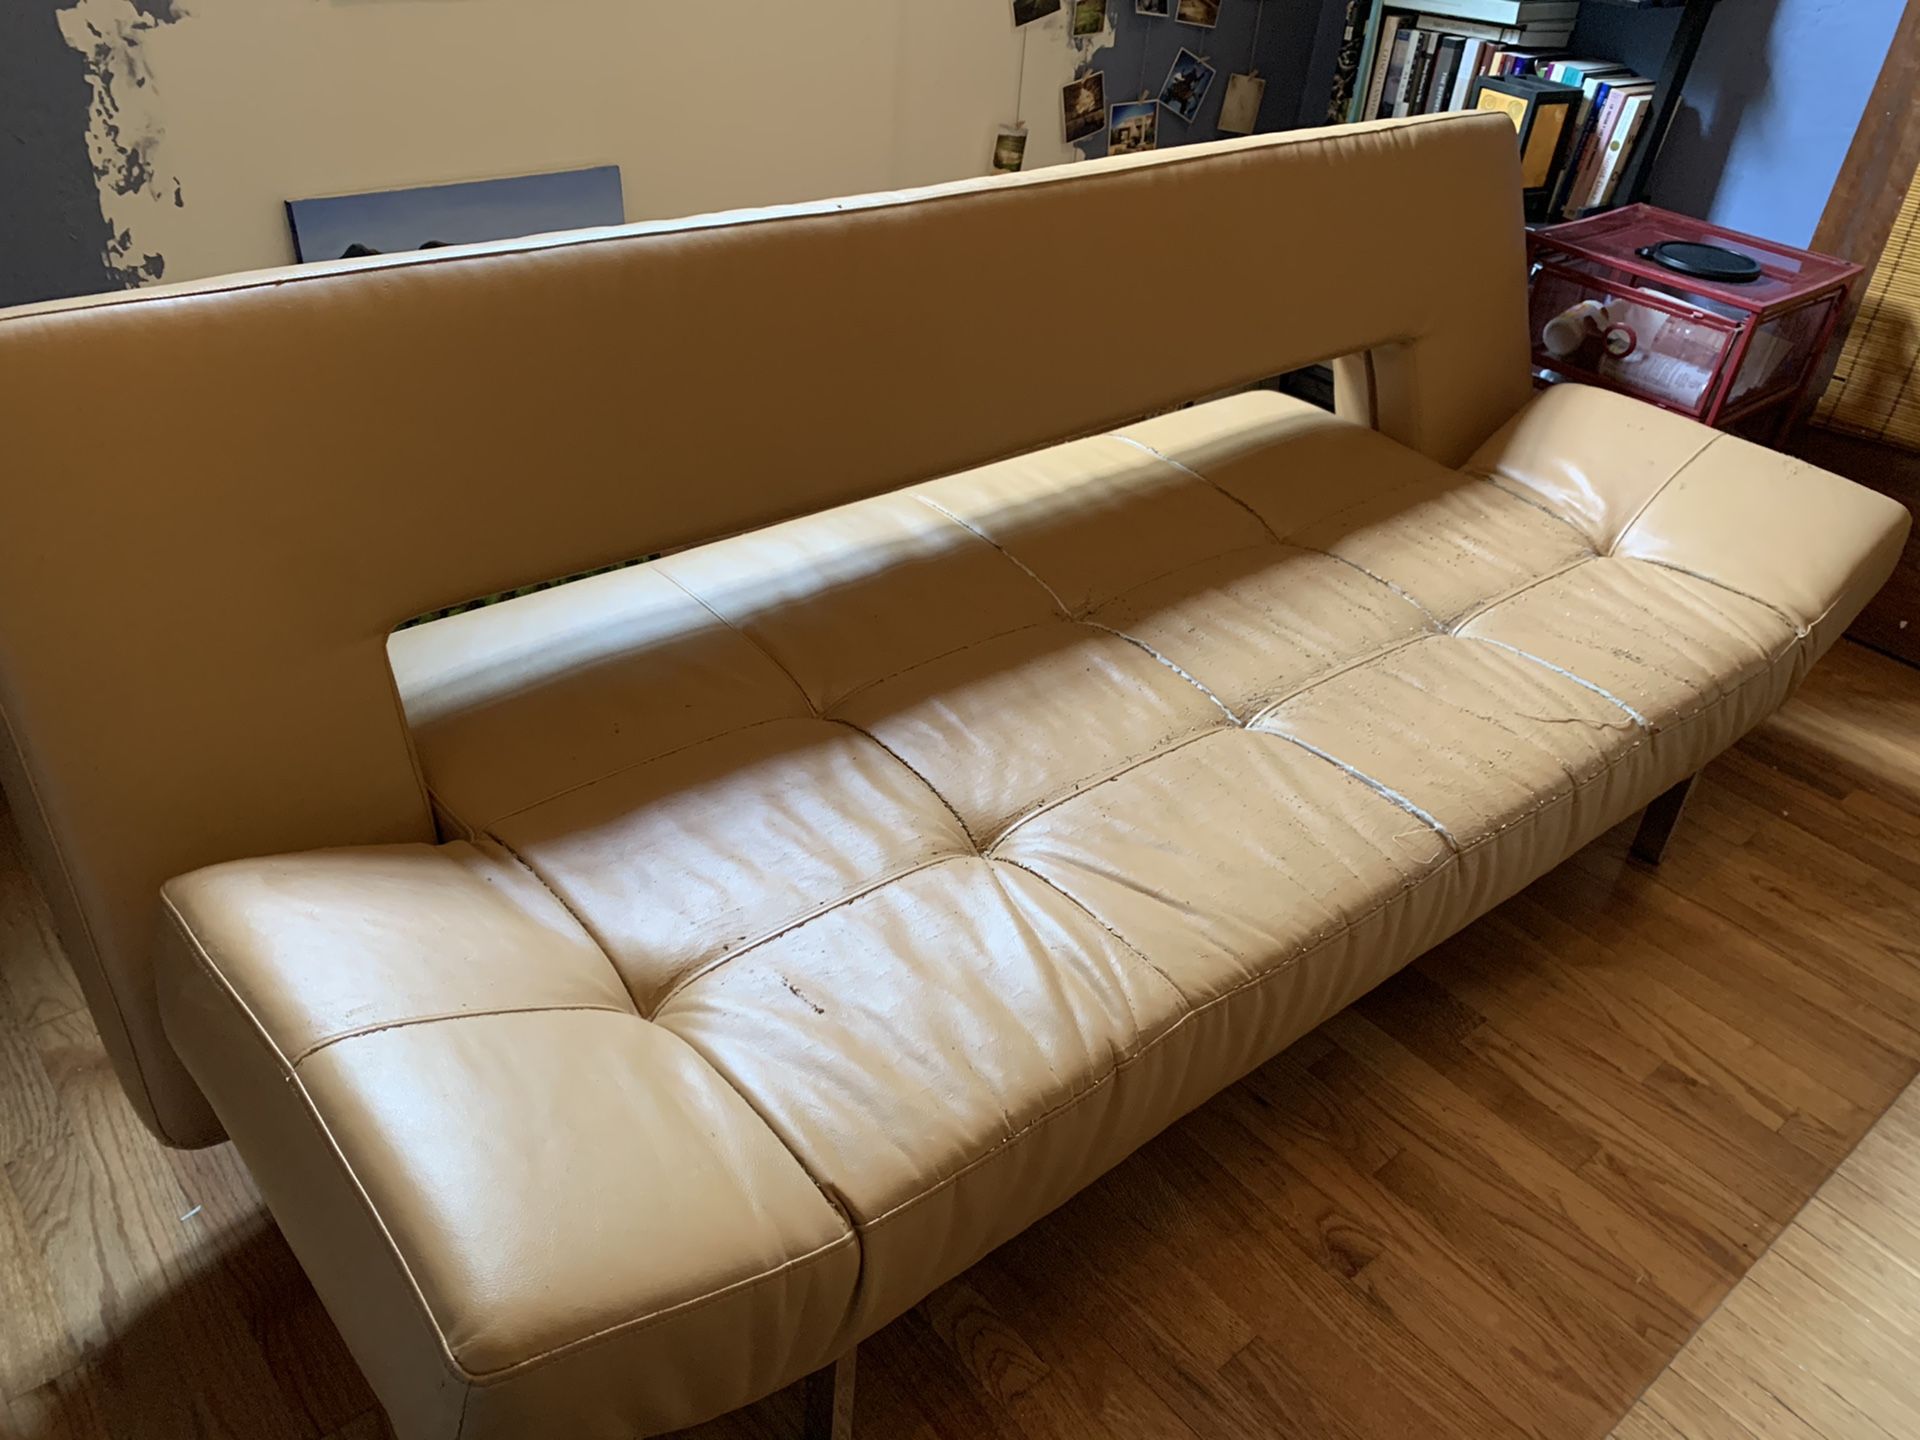 Designer leather futon / couch converts to bed